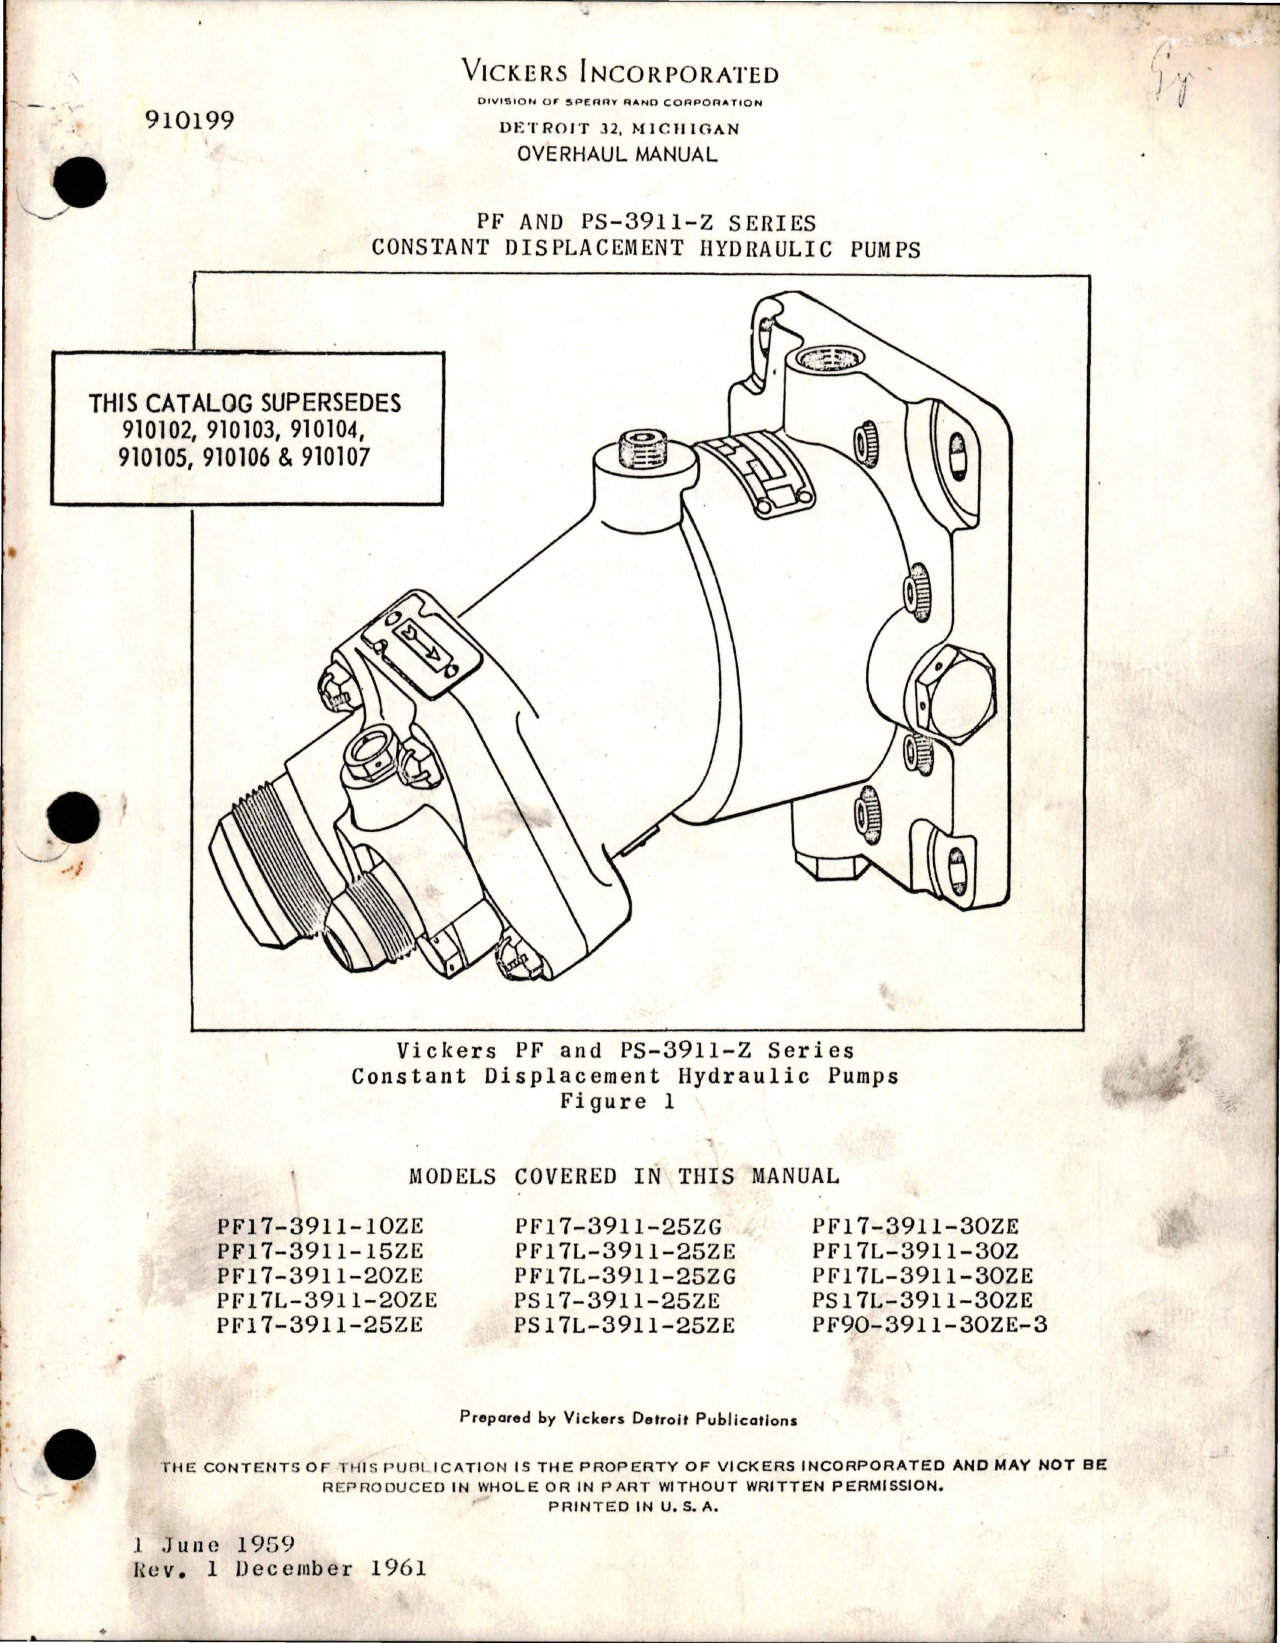 Sample page 1 from AirCorps Library document: Overhaul Manual for Constant Displacement Hydraulic Pumps - PF and PS-3911-Z Series